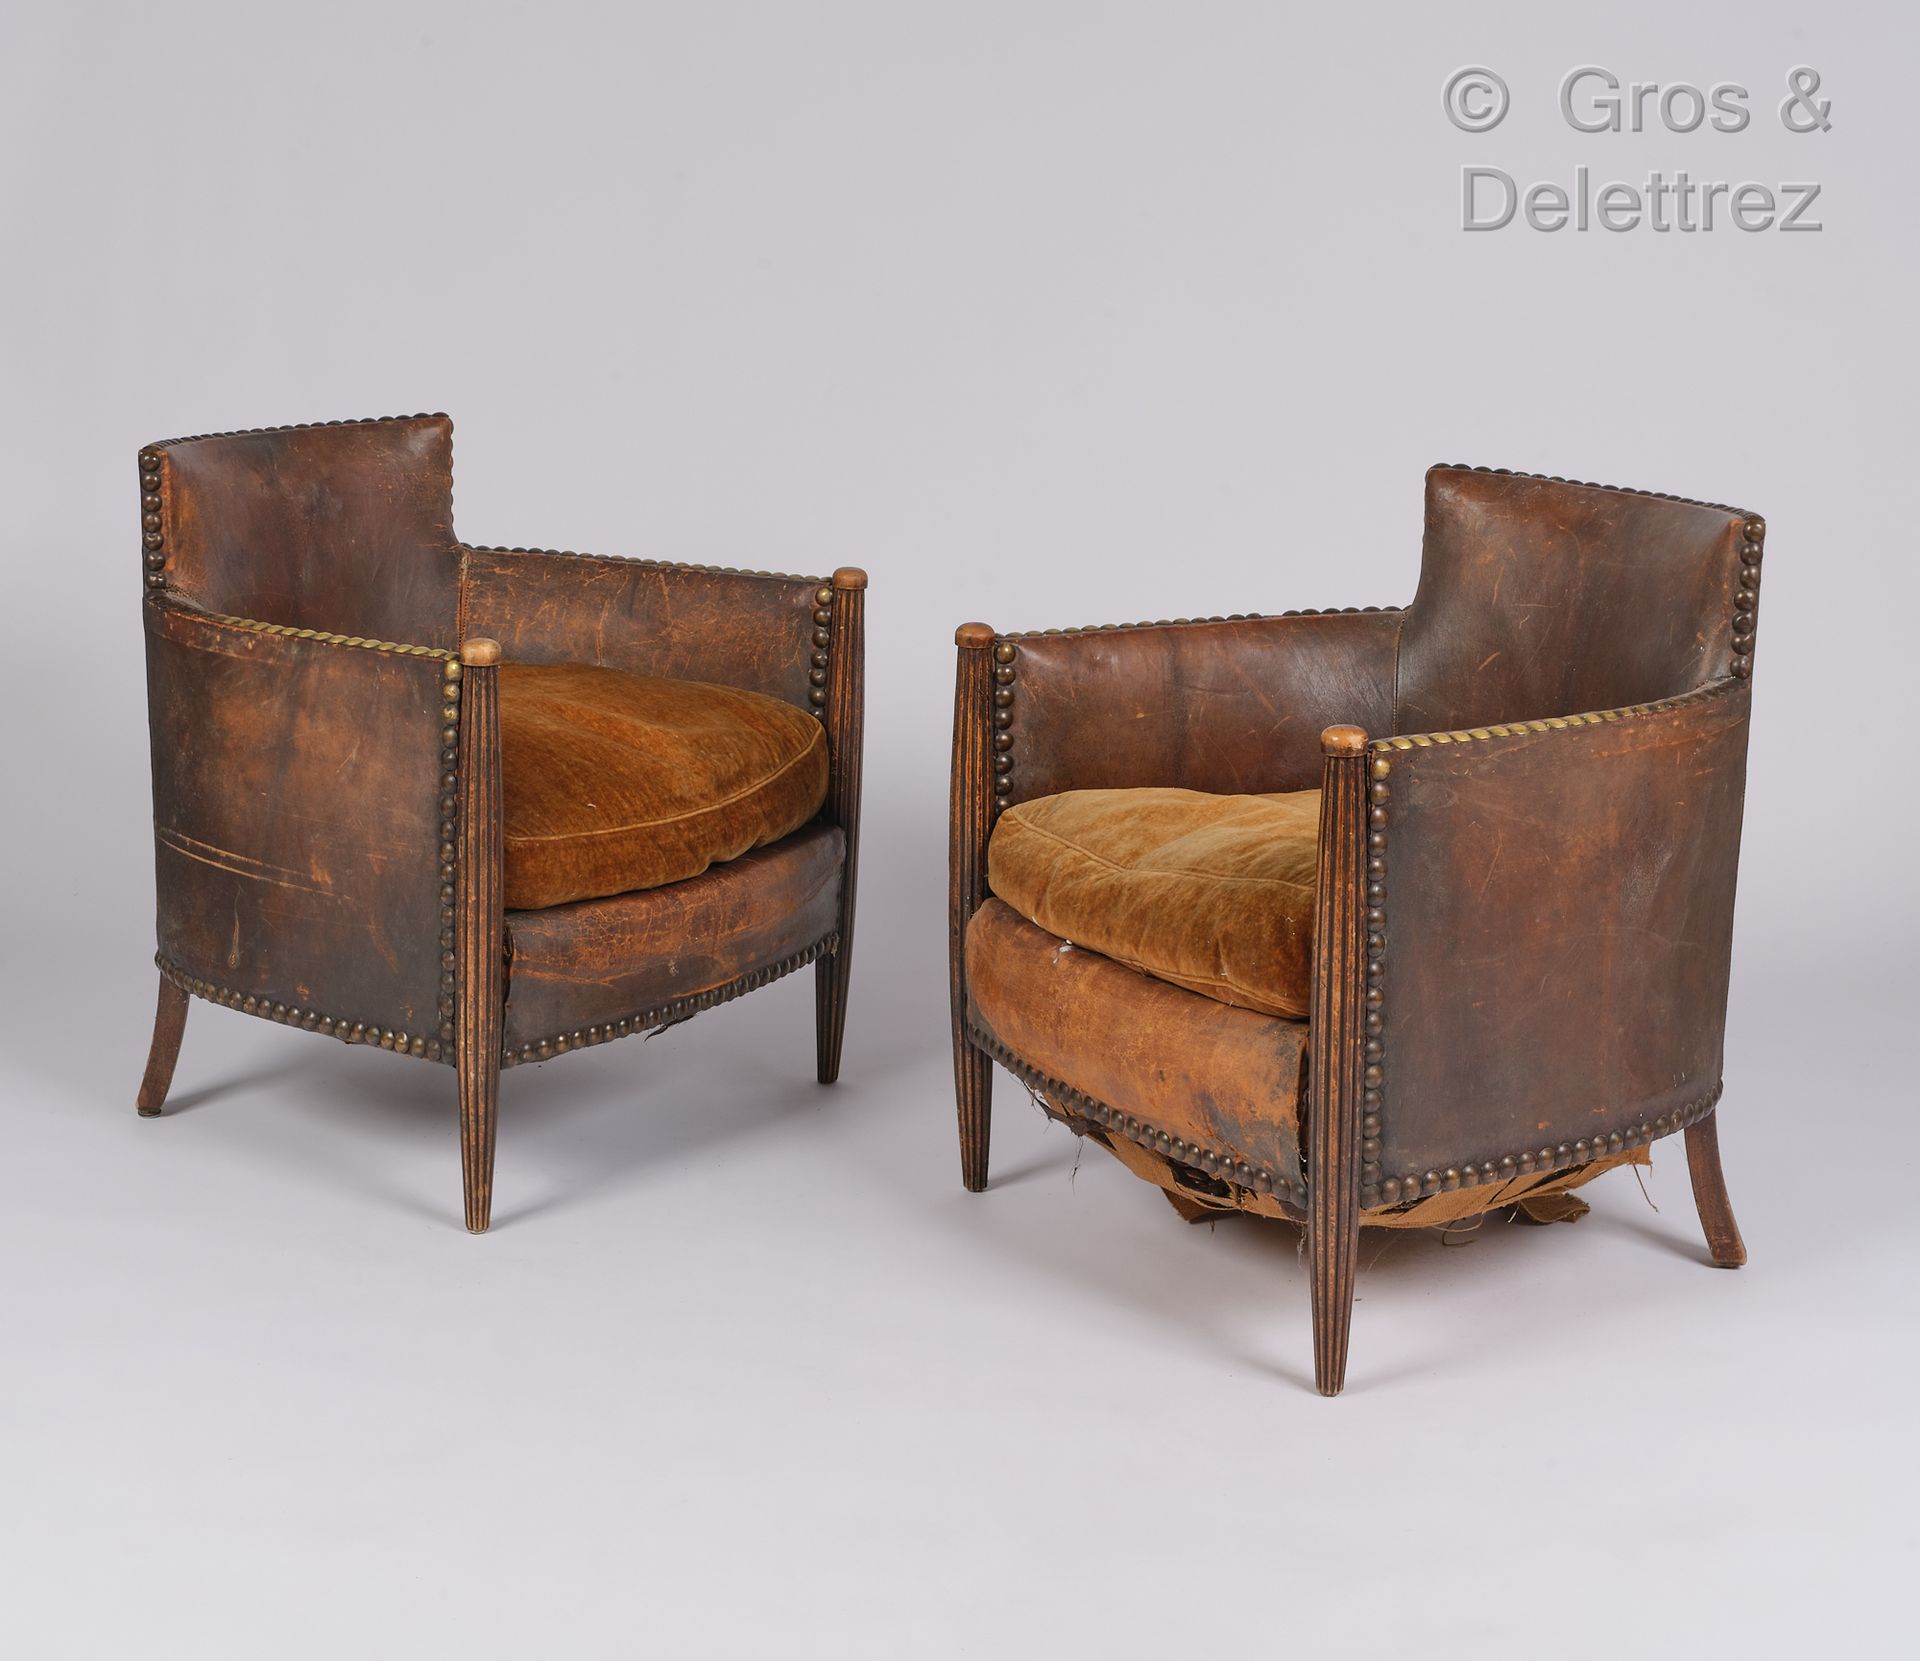 Null Work 1925

Pair of armchairs, front legs in fluted wood, brown leather and &hellip;